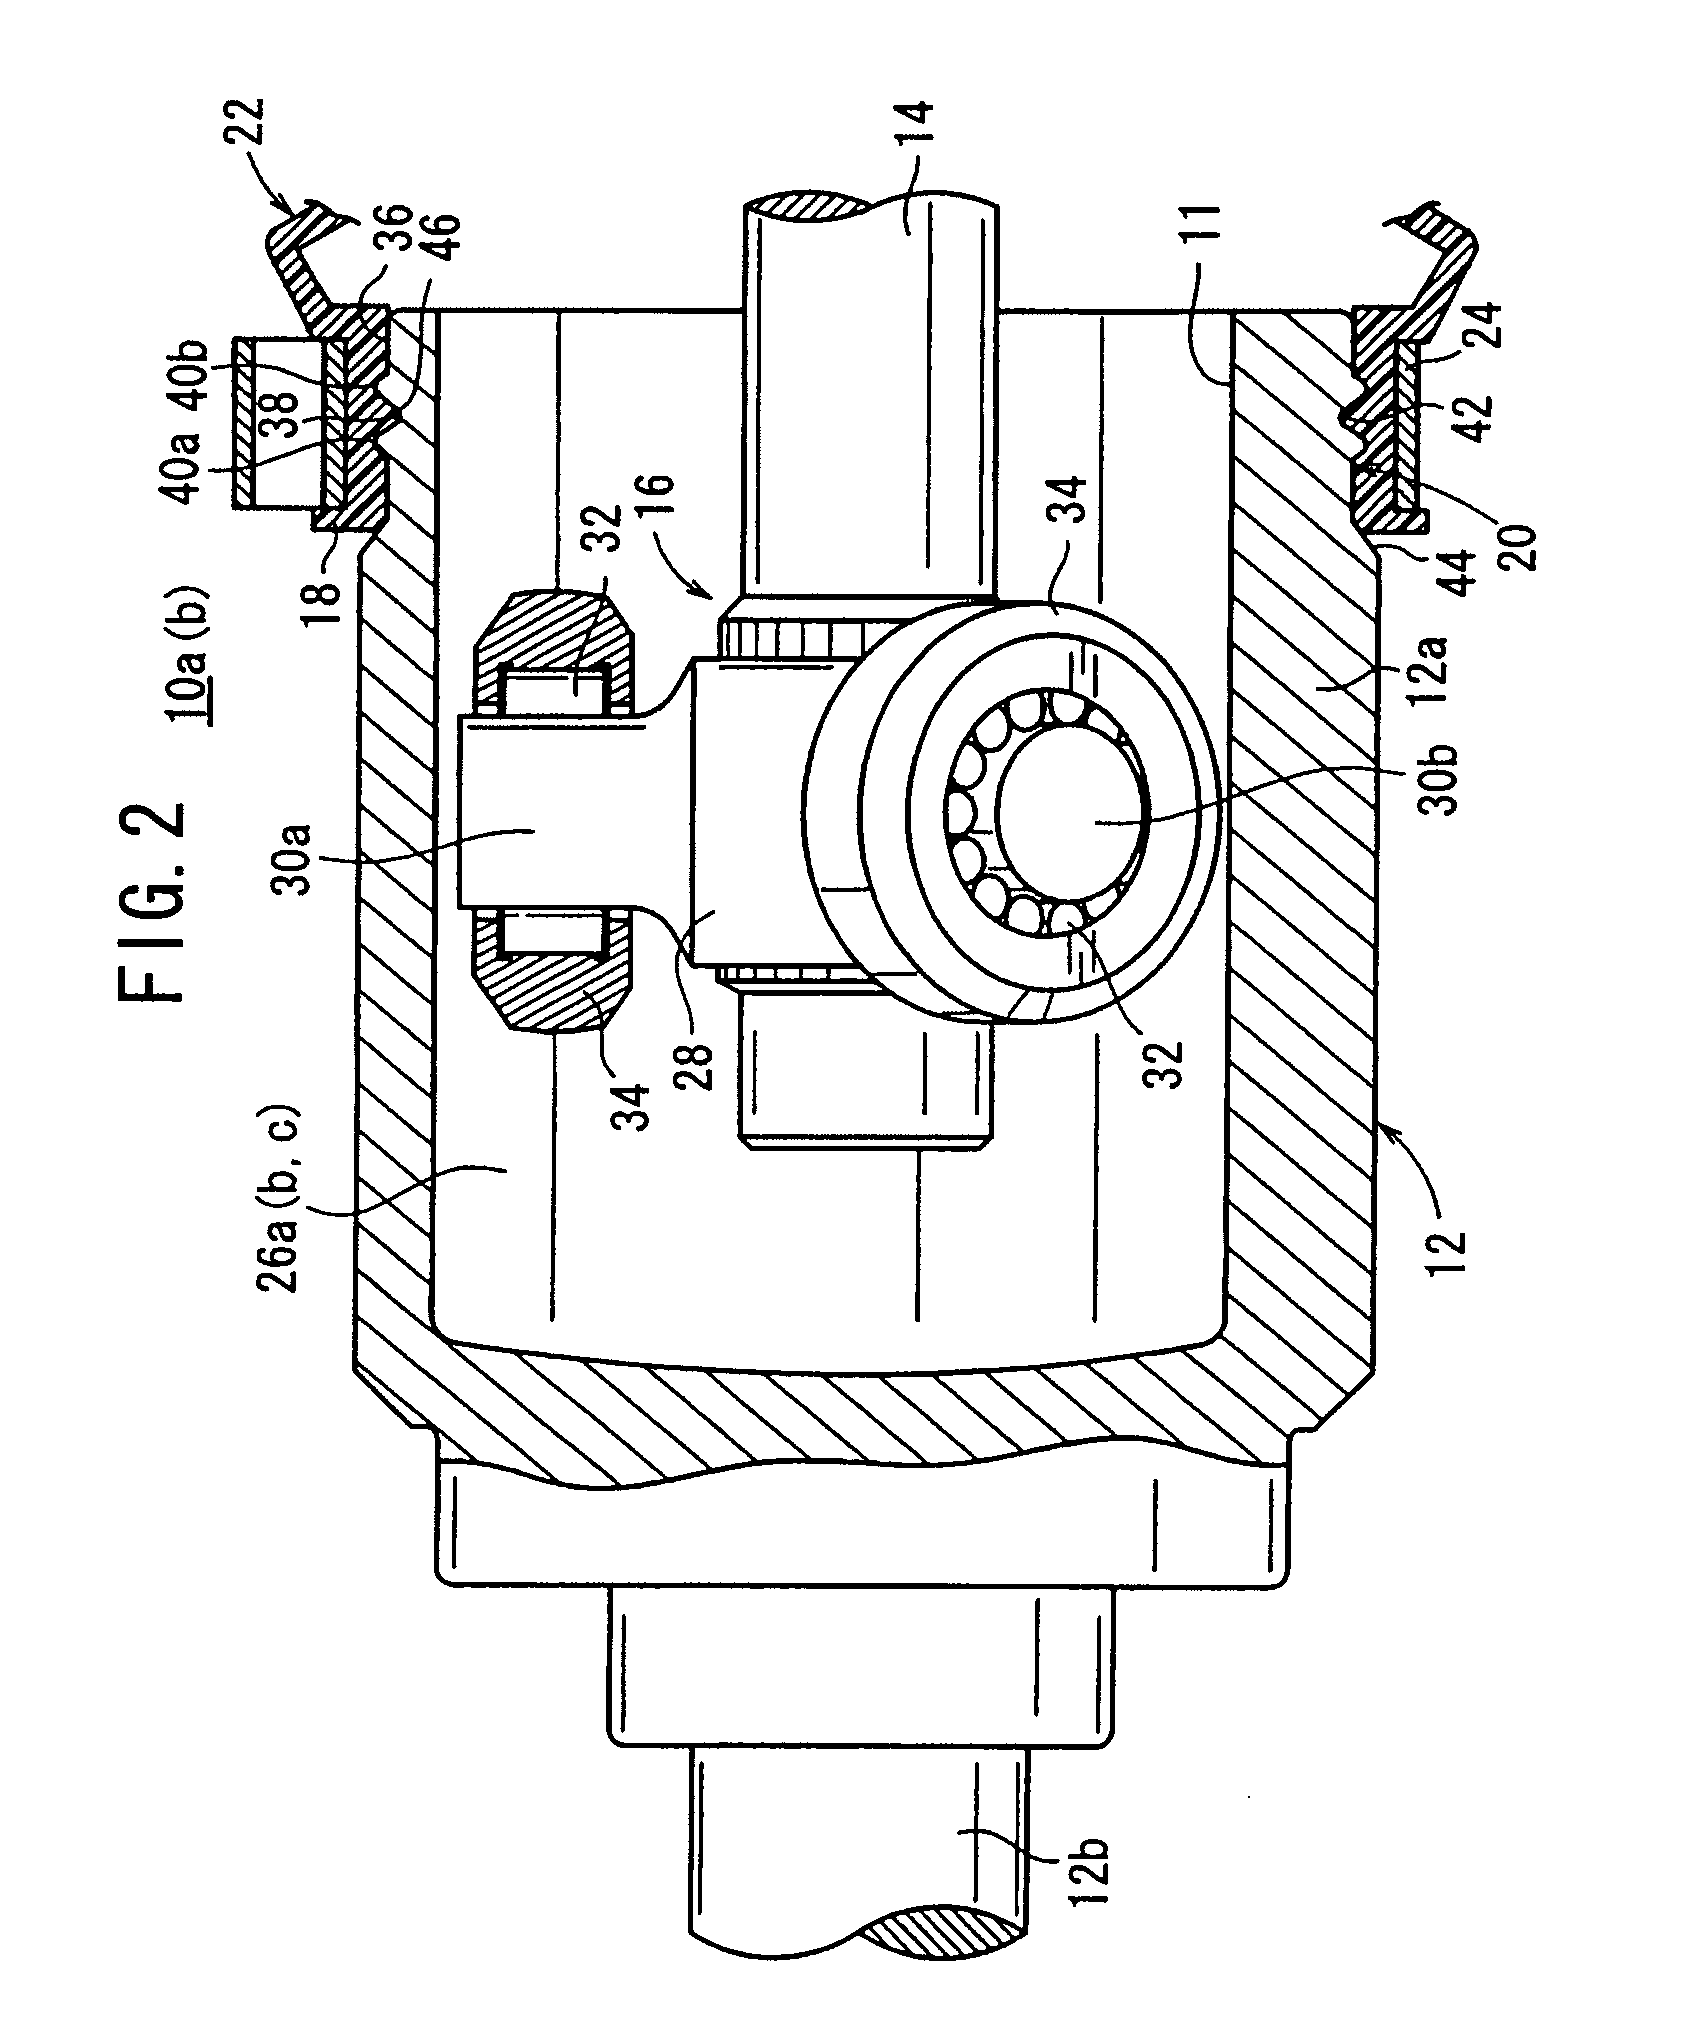 Rotation Drive Force Transmission Mechanism, Constant Velocity Universal Joint and Resin Joint Boot Constructing the Mechanism, and Method of Tightening Clamp Band for Constant Velocity Universal Joint